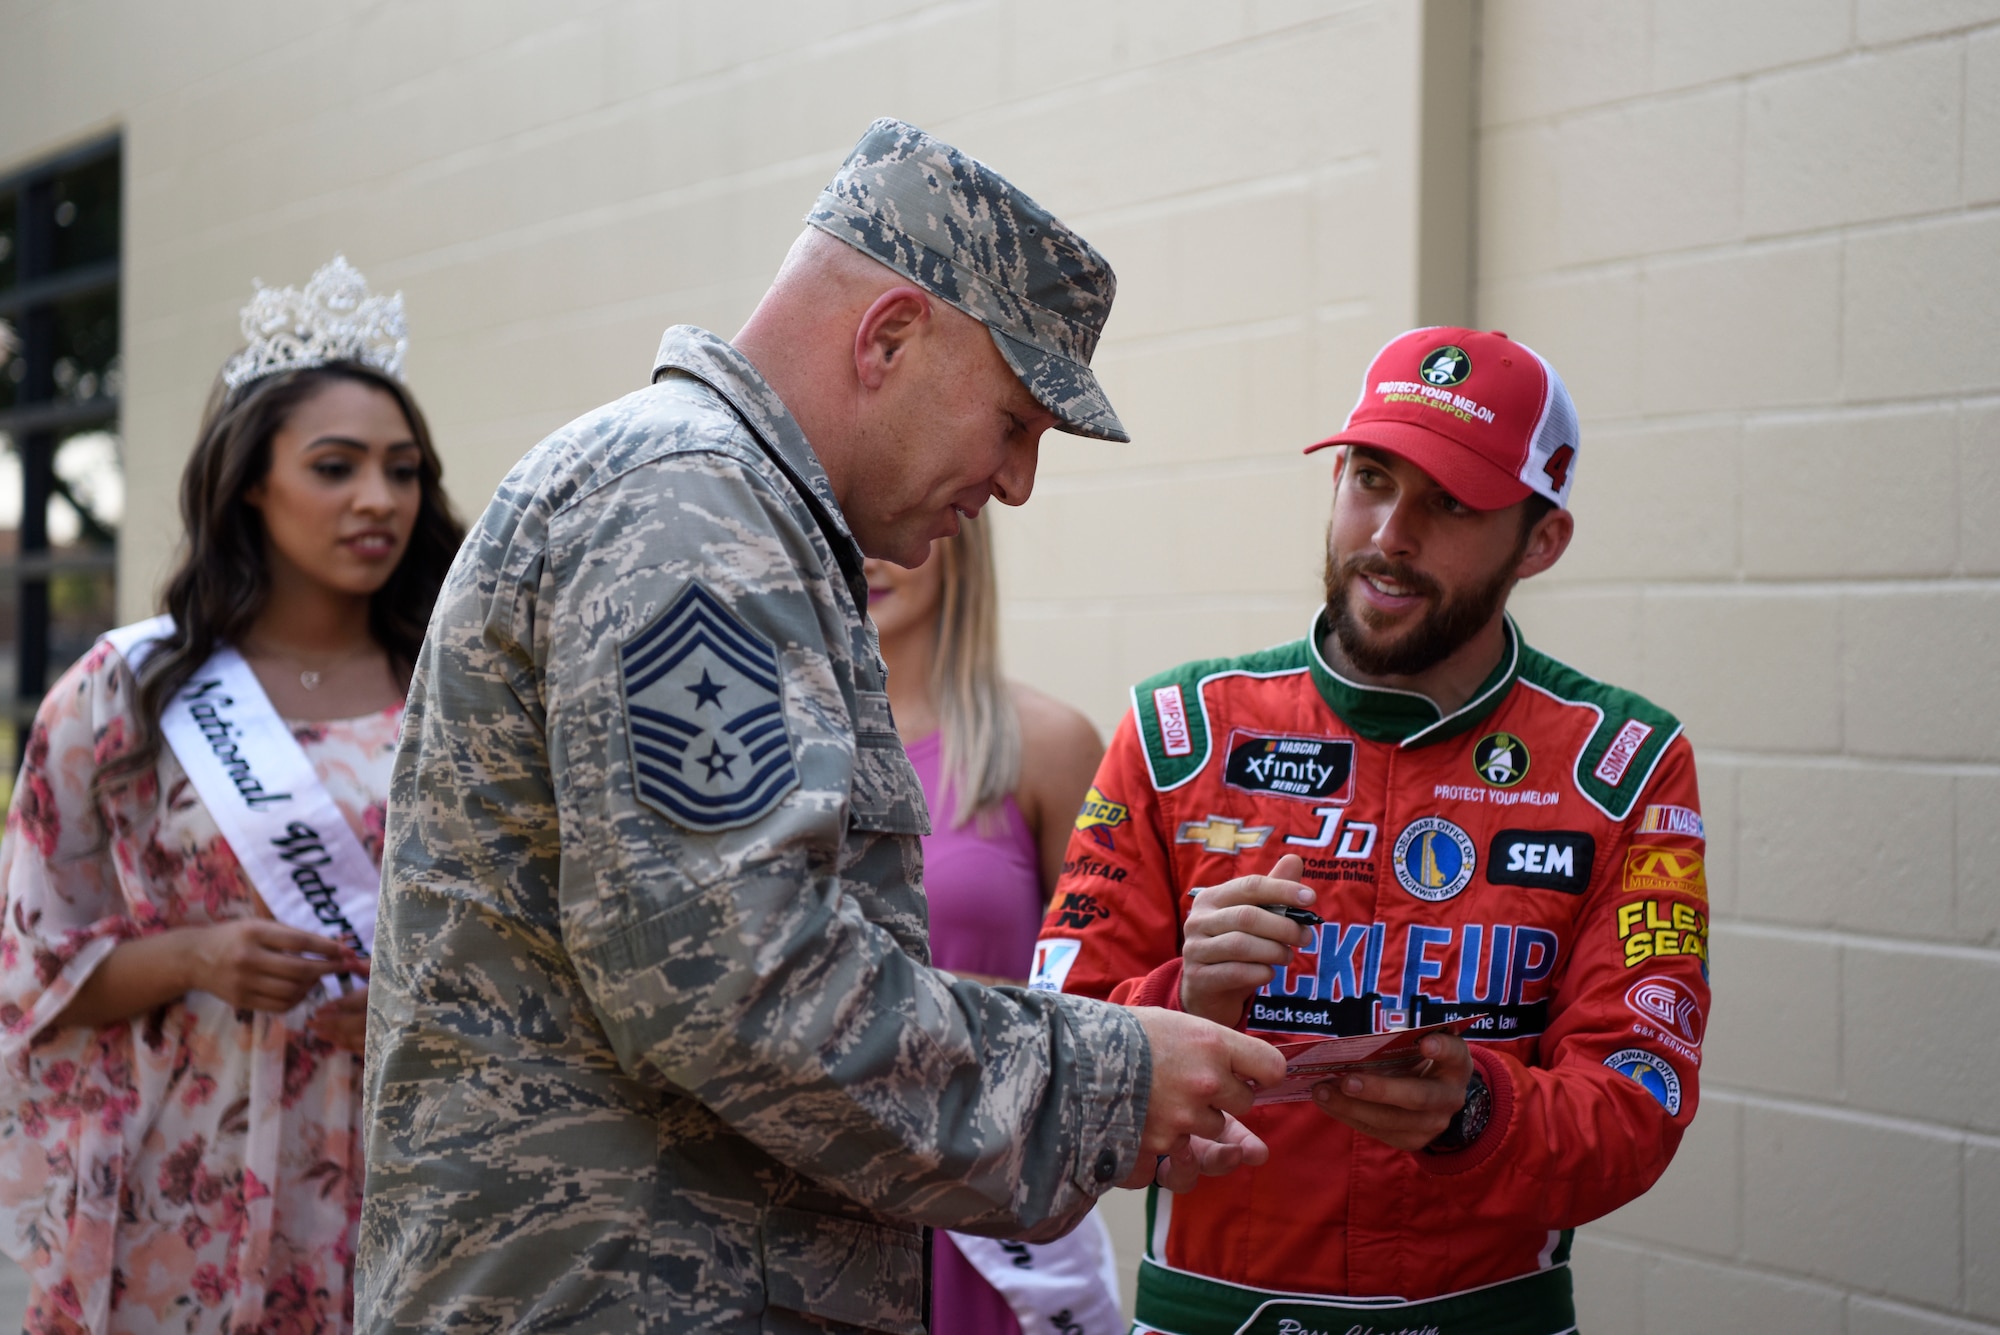 Chief Master Sgt. Anthony Green, 436th Airlift Wing command chief, gets an autograph from Ross Chastain, driver of the No. 15 Premium Motorsports Chevrolet Camaro car, May 4, 2018, at Dover Air Force Base, Del. Several NASCAR drivers attended May’s First Friday in Hangar 295 at the Landings to sign autographs and meet some of Team Dover’s Airmen. (U.S. Air Force photo by Airman 1st Class Zoe M. Wockenfuss)